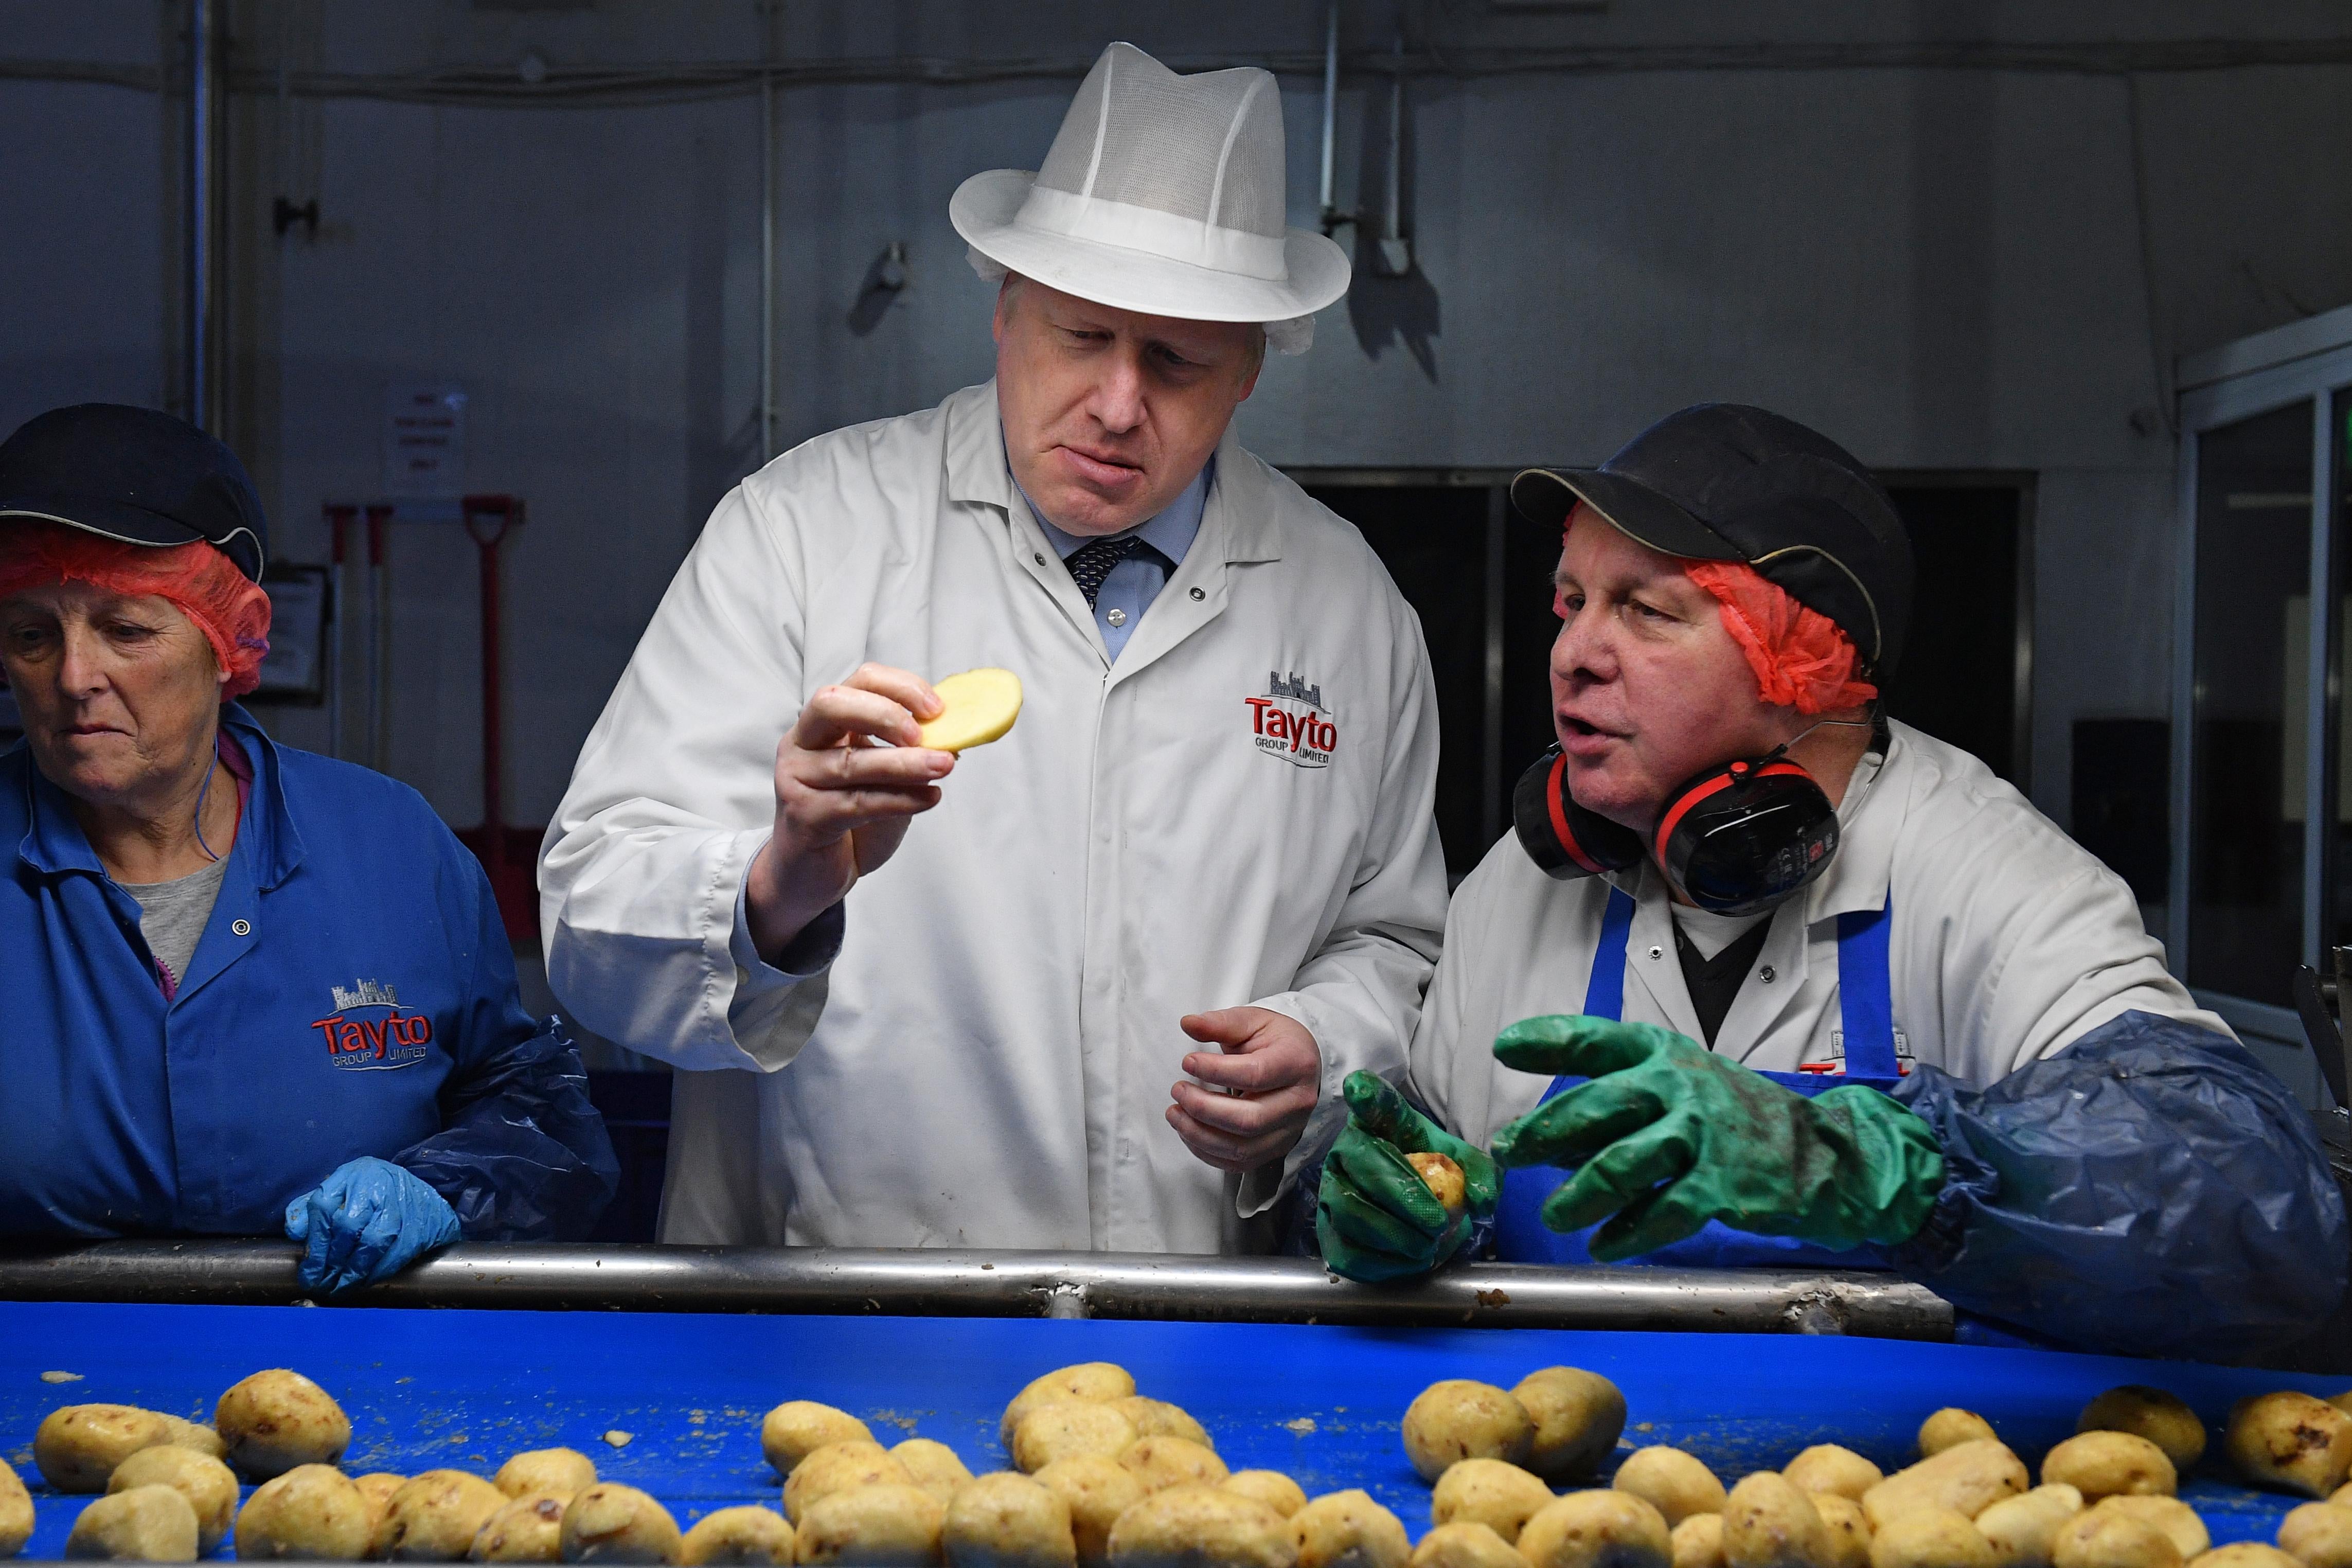 Boris Johnson inspects a potato while he and two workers stand in front of a conveyor belt of potatoes. 